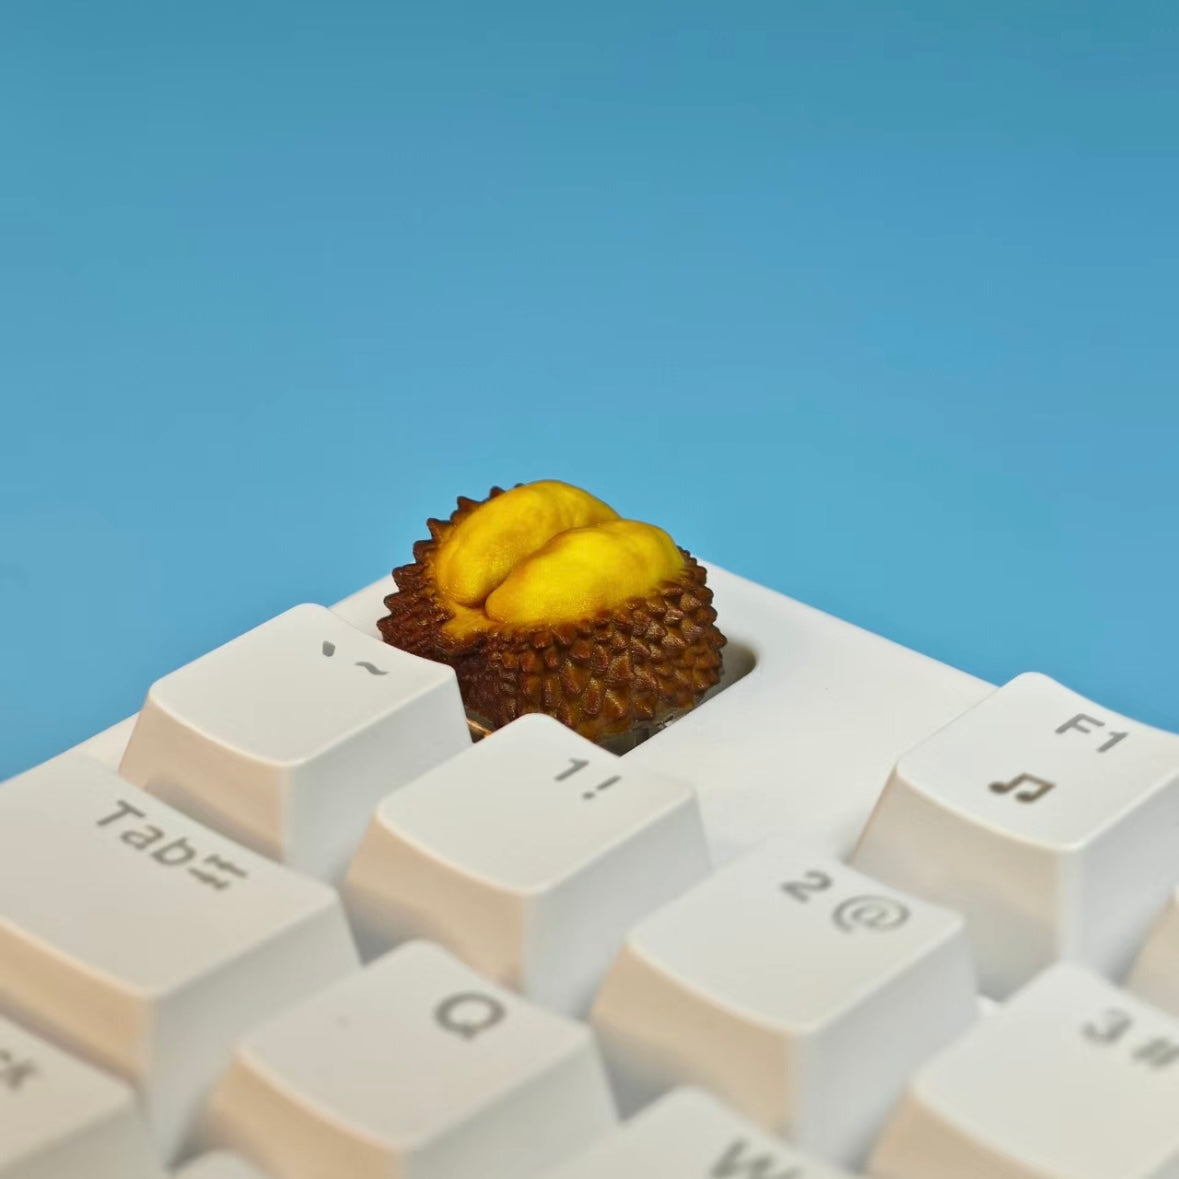 Durian Artisan Keycaps Durian with thorns, simulated durian keycaps